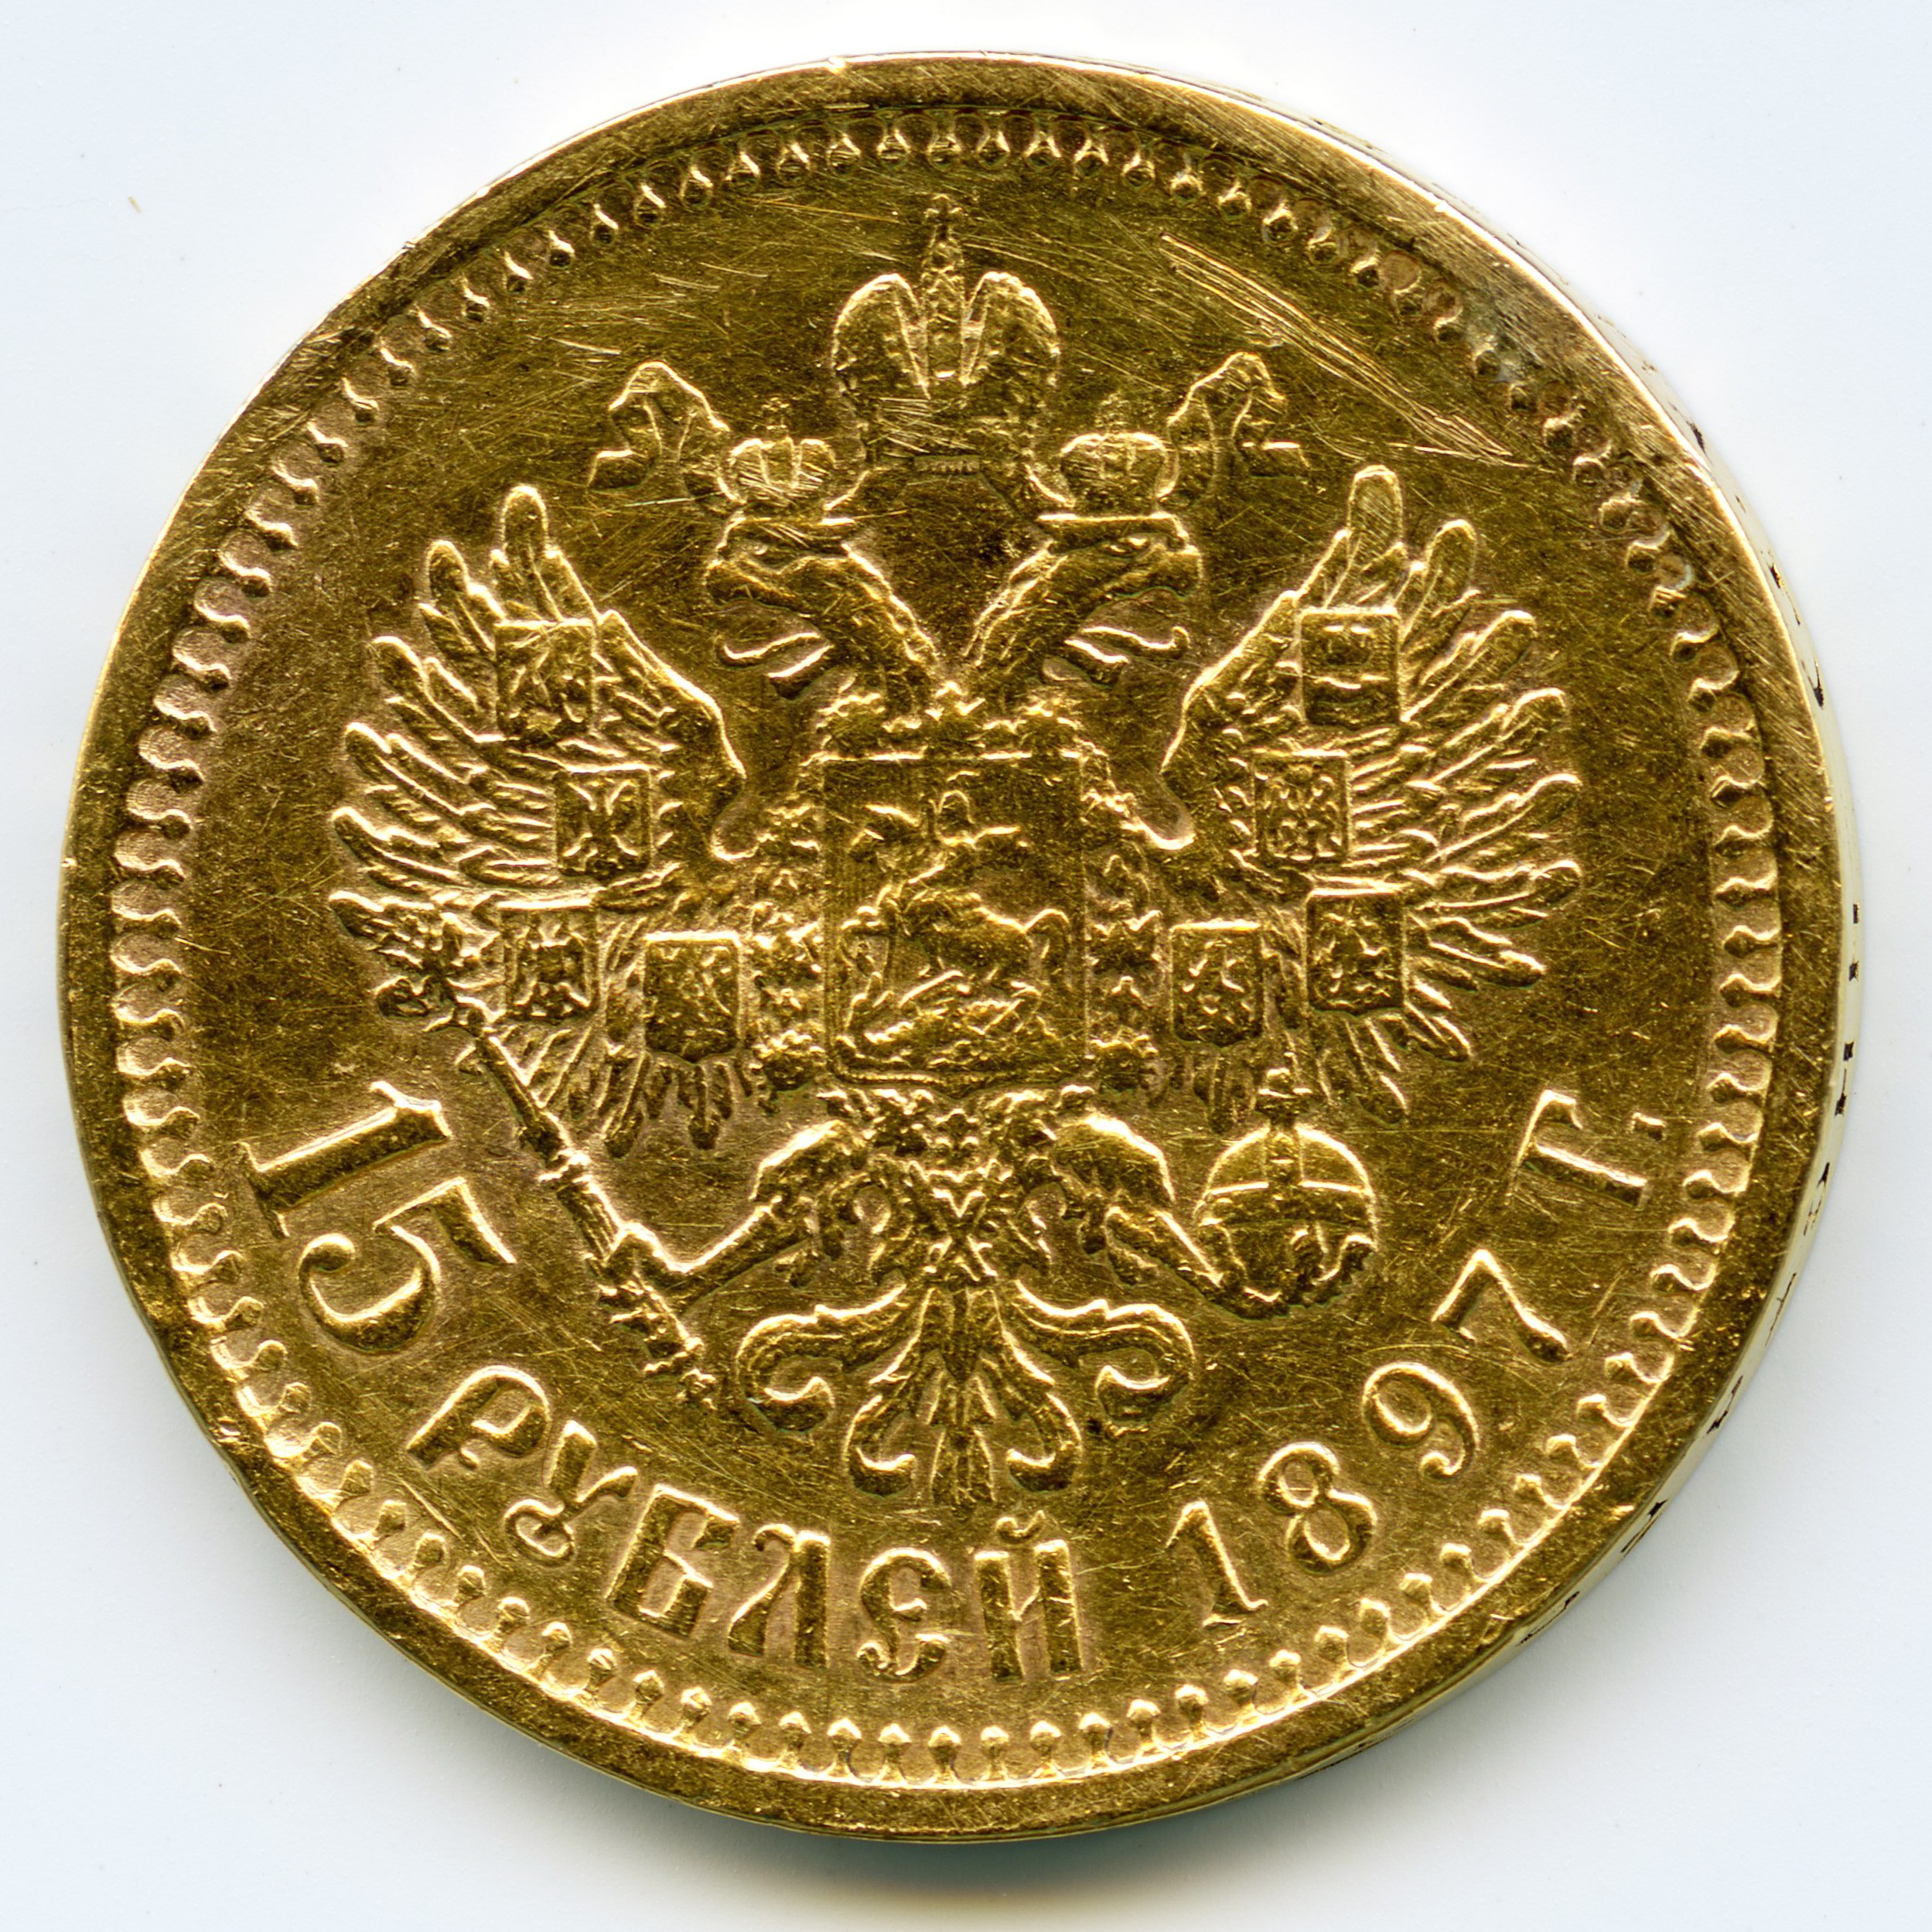 Russie - 15 Roubles - 1897 revers